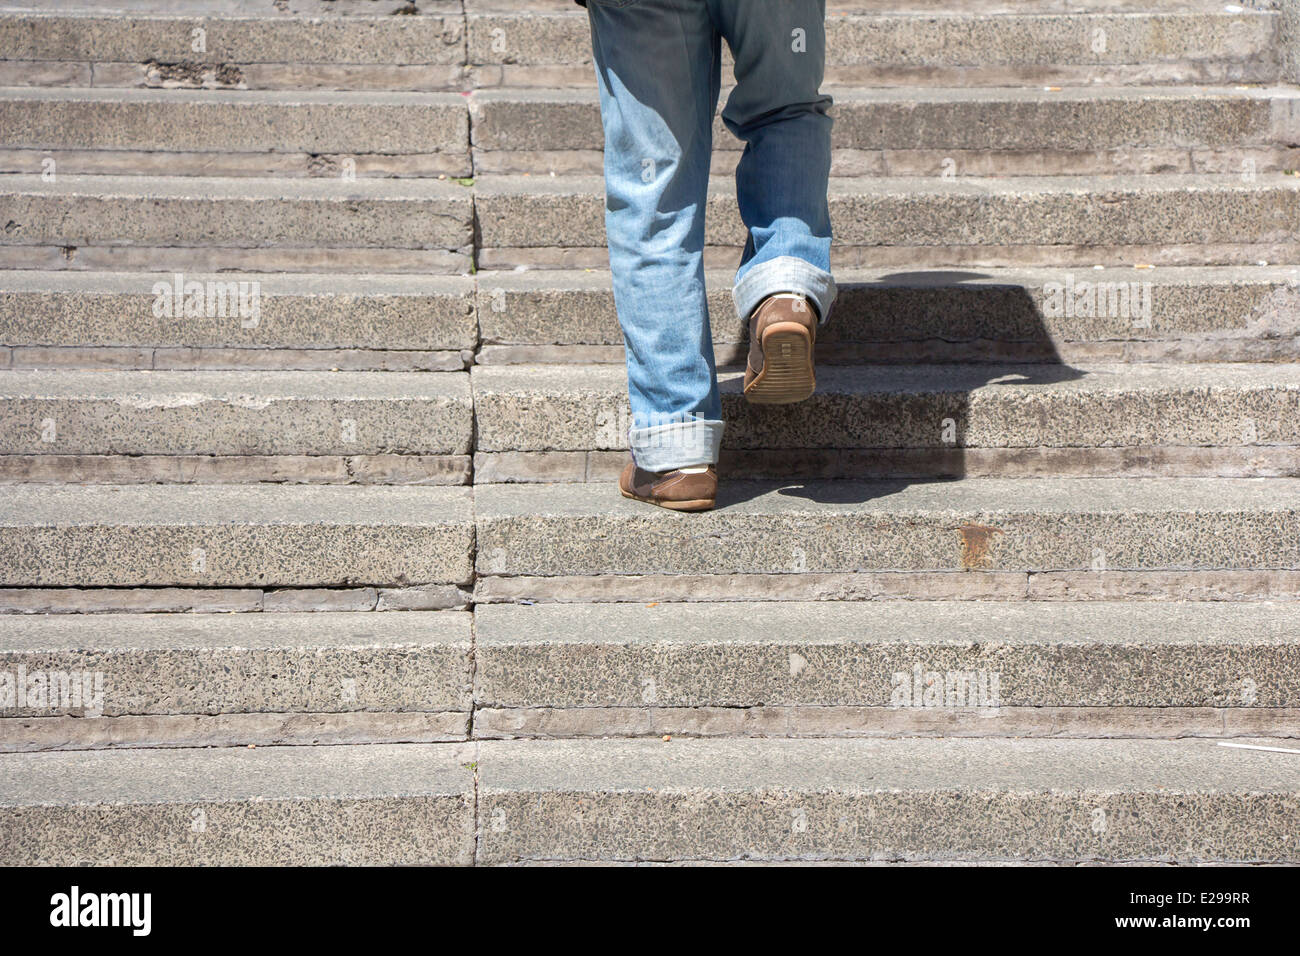 Man climbs on a concrete stairs Stock Photo